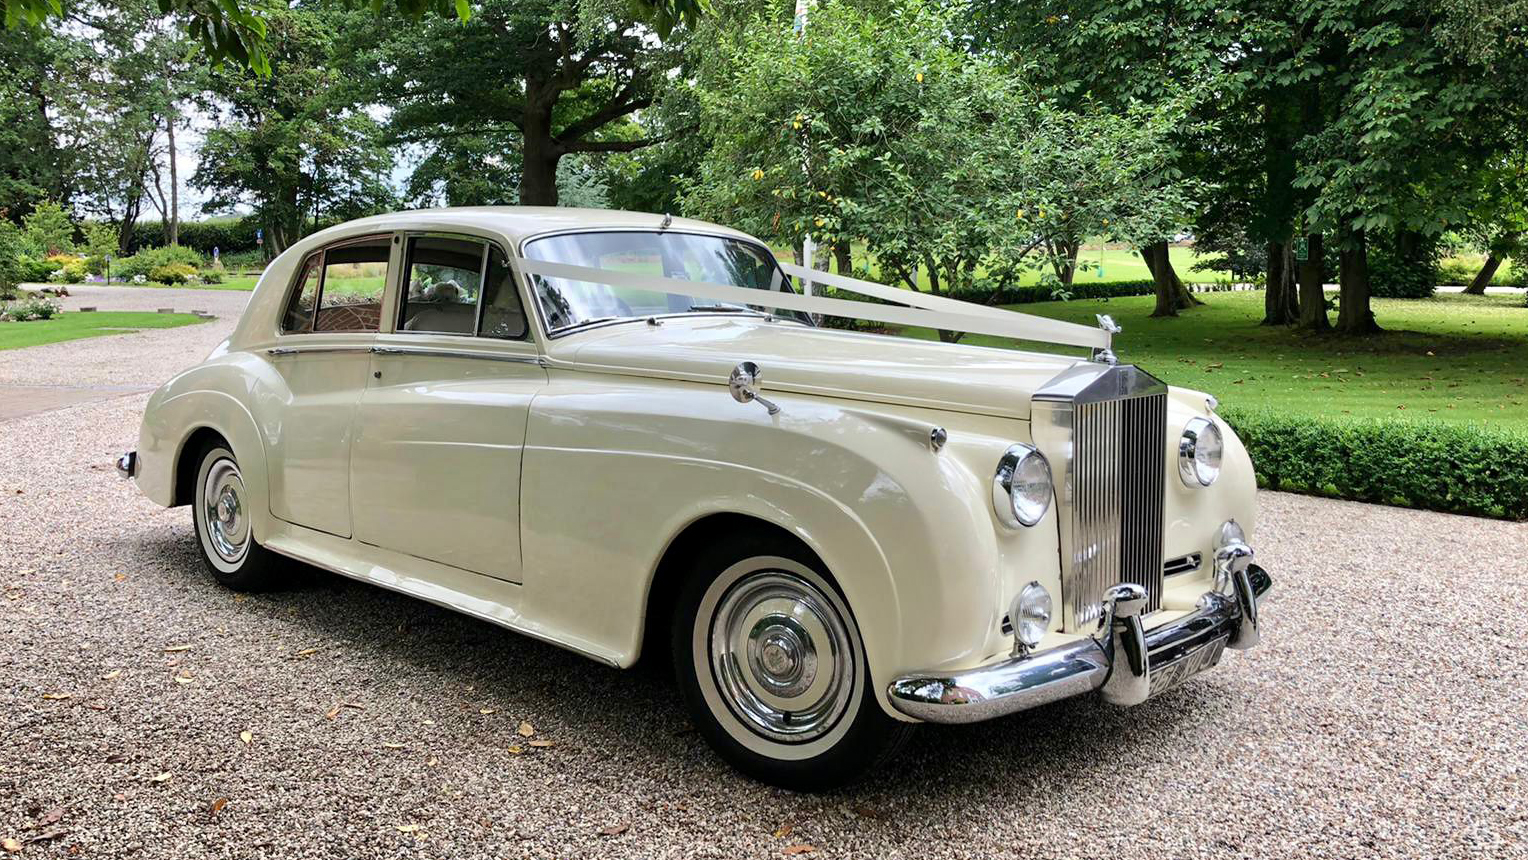 A classic Rolls-Royce silver Cloud in White dressed with traditional Ivory Ribbons across its front bonnet. Car has white wall tires and large chrome grill with spirit of ecstasy o